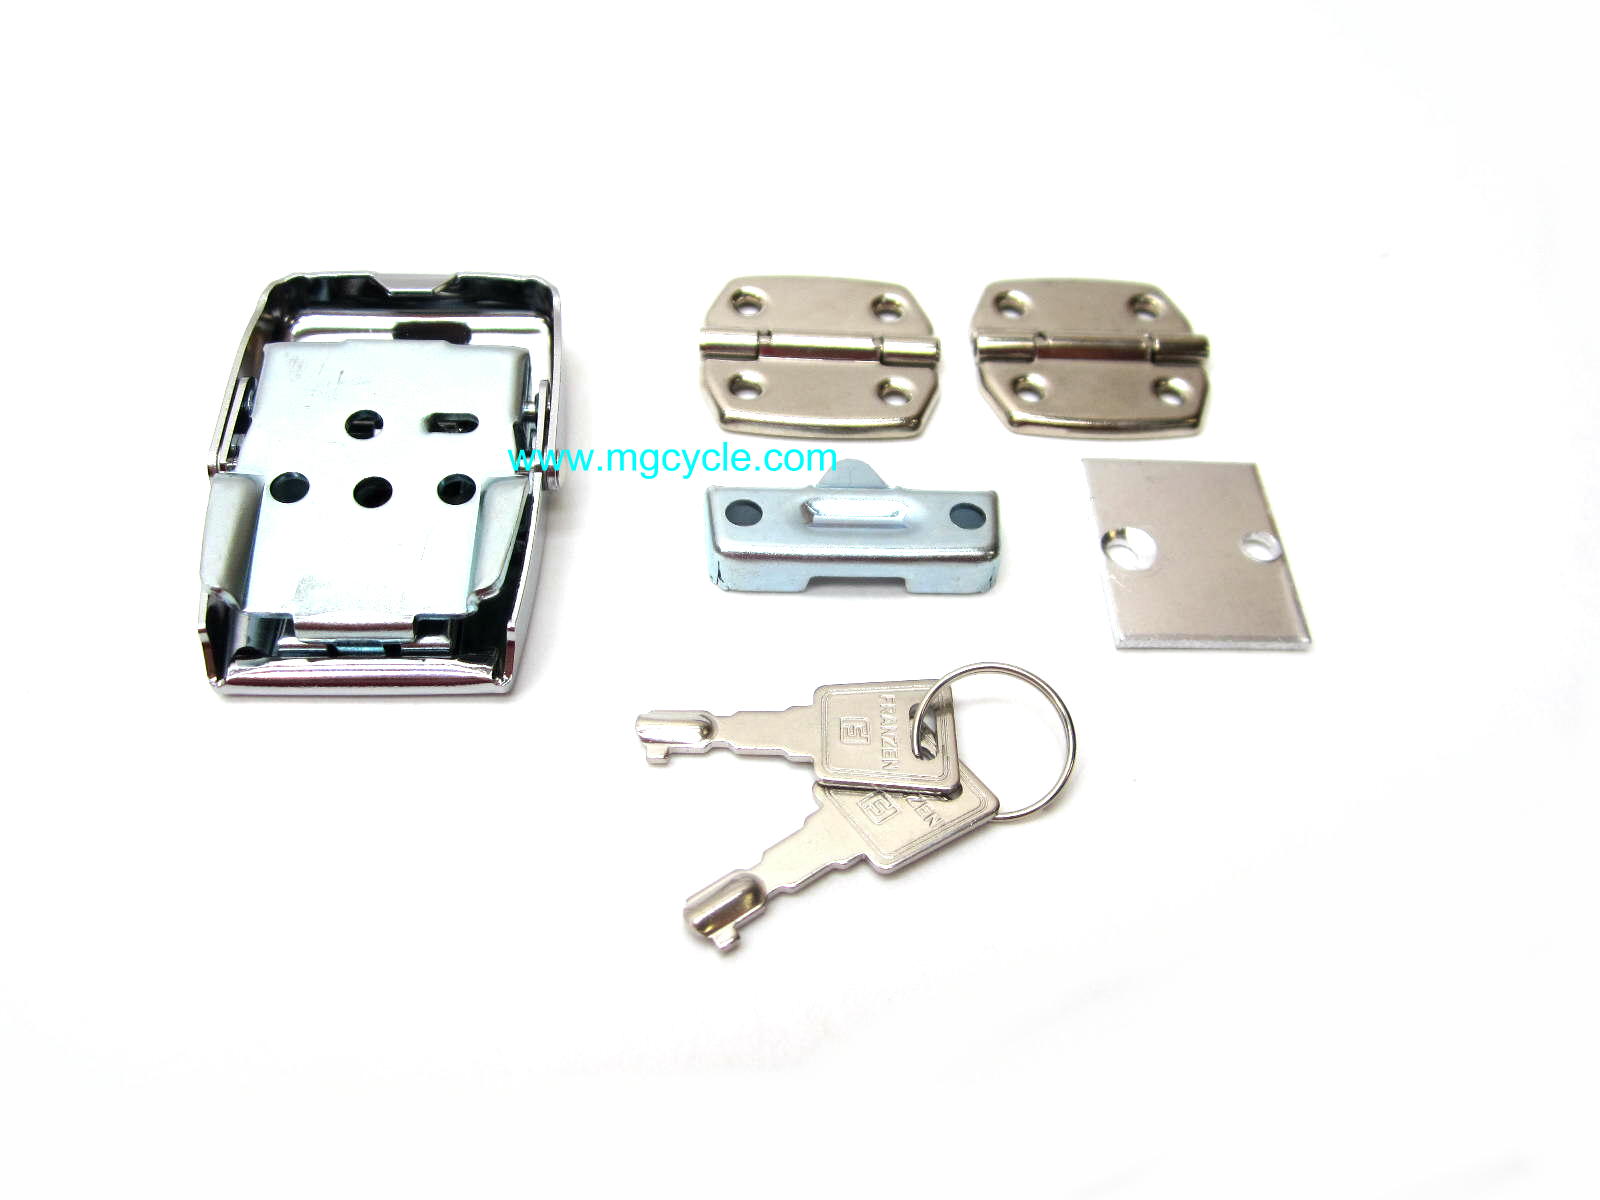 Hinge, latch and lock set for T3 Convert G5 saddlebag - Click Image to Close